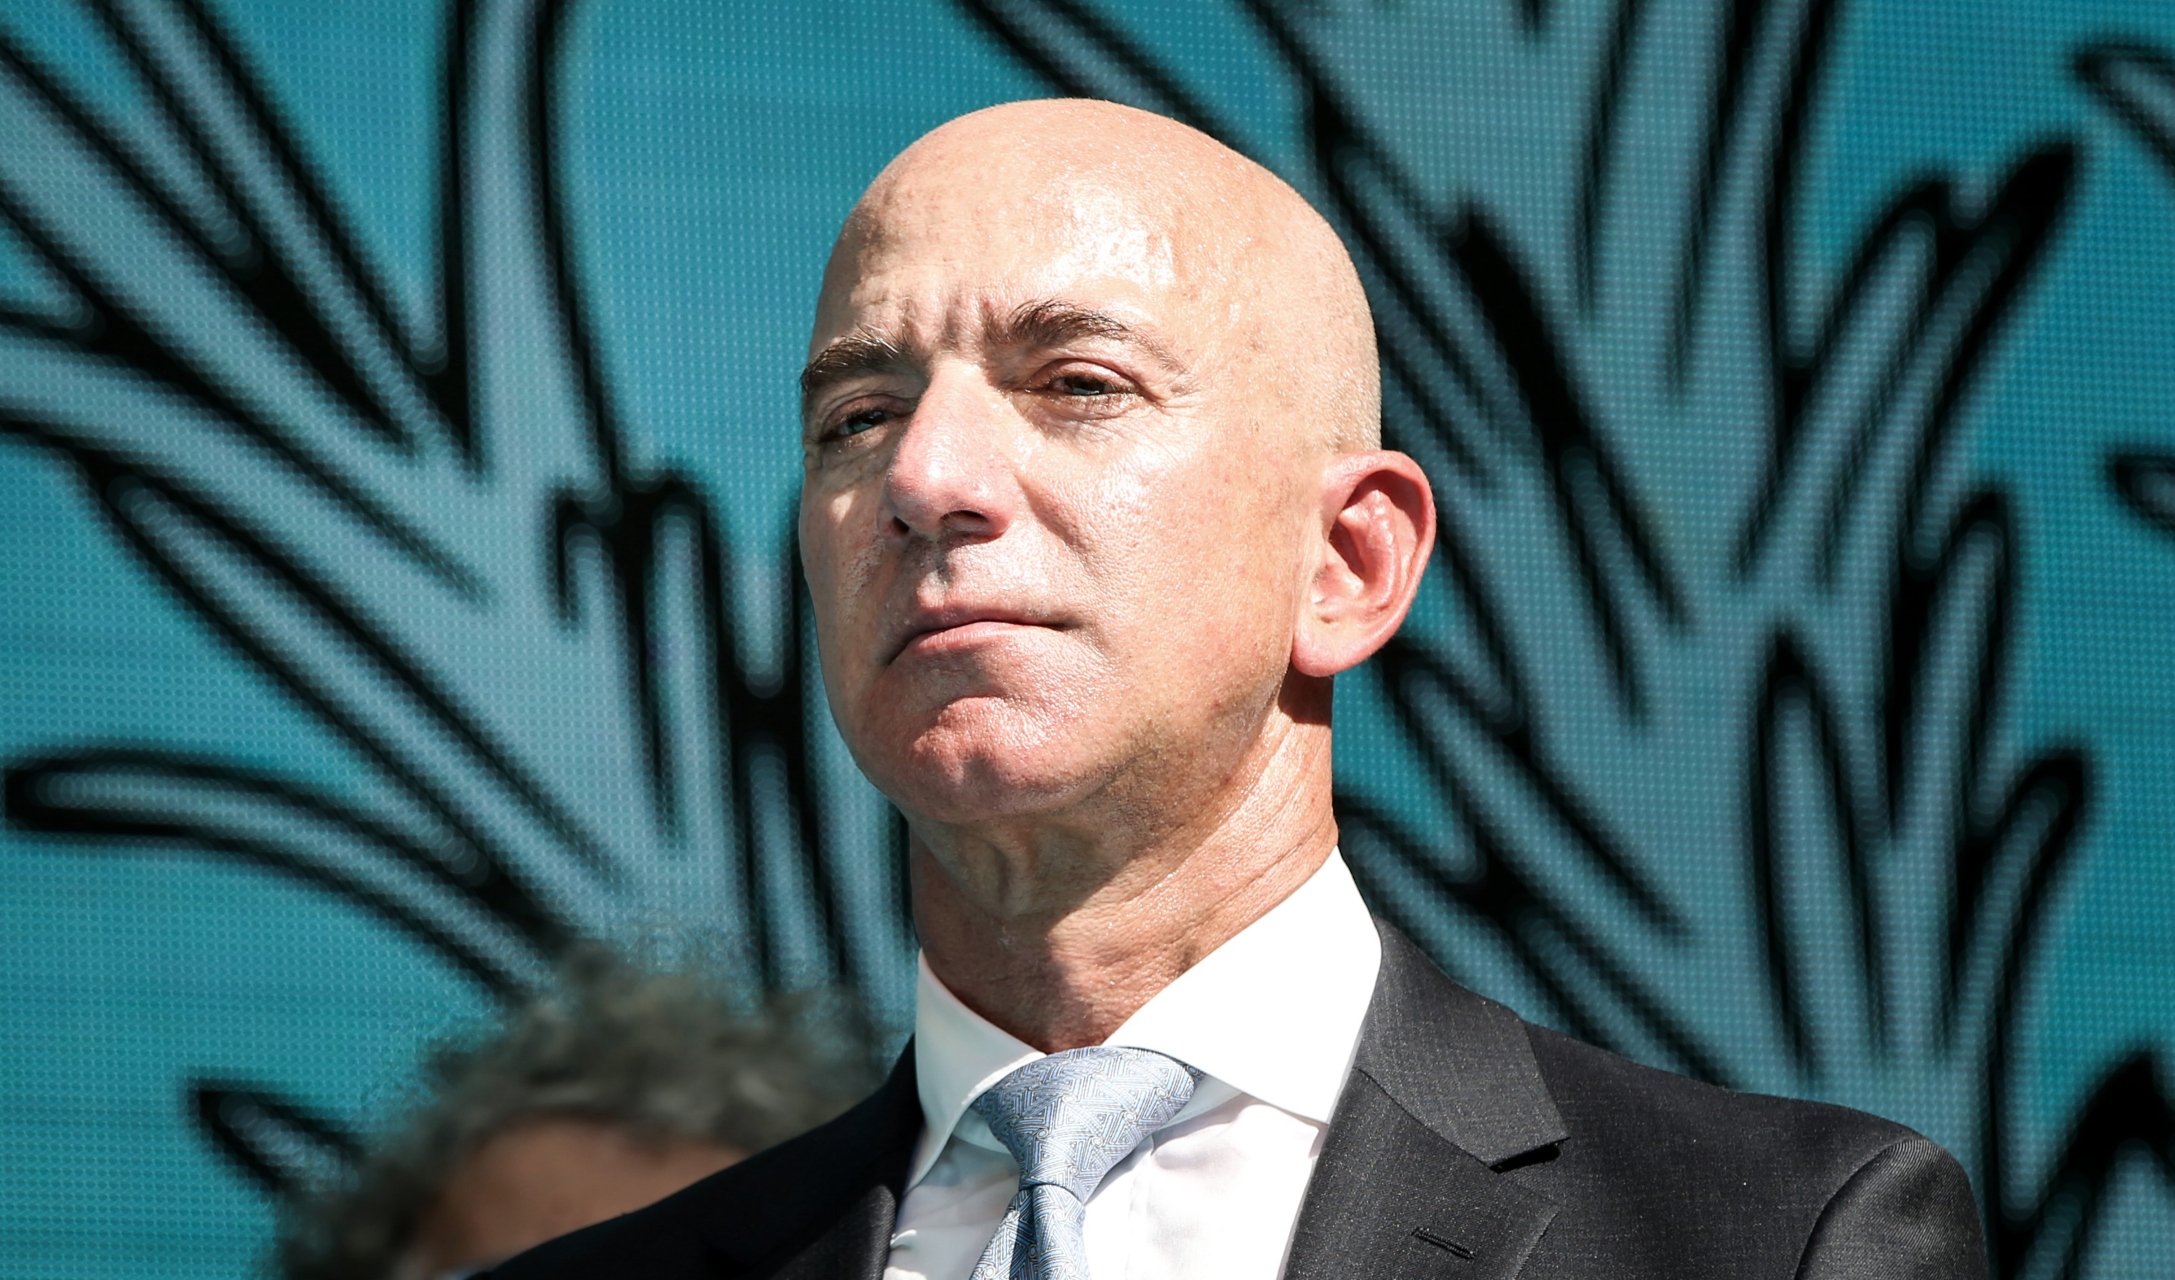 Elon Musk Passes Jeff Bezos to Become Richest Person in the World